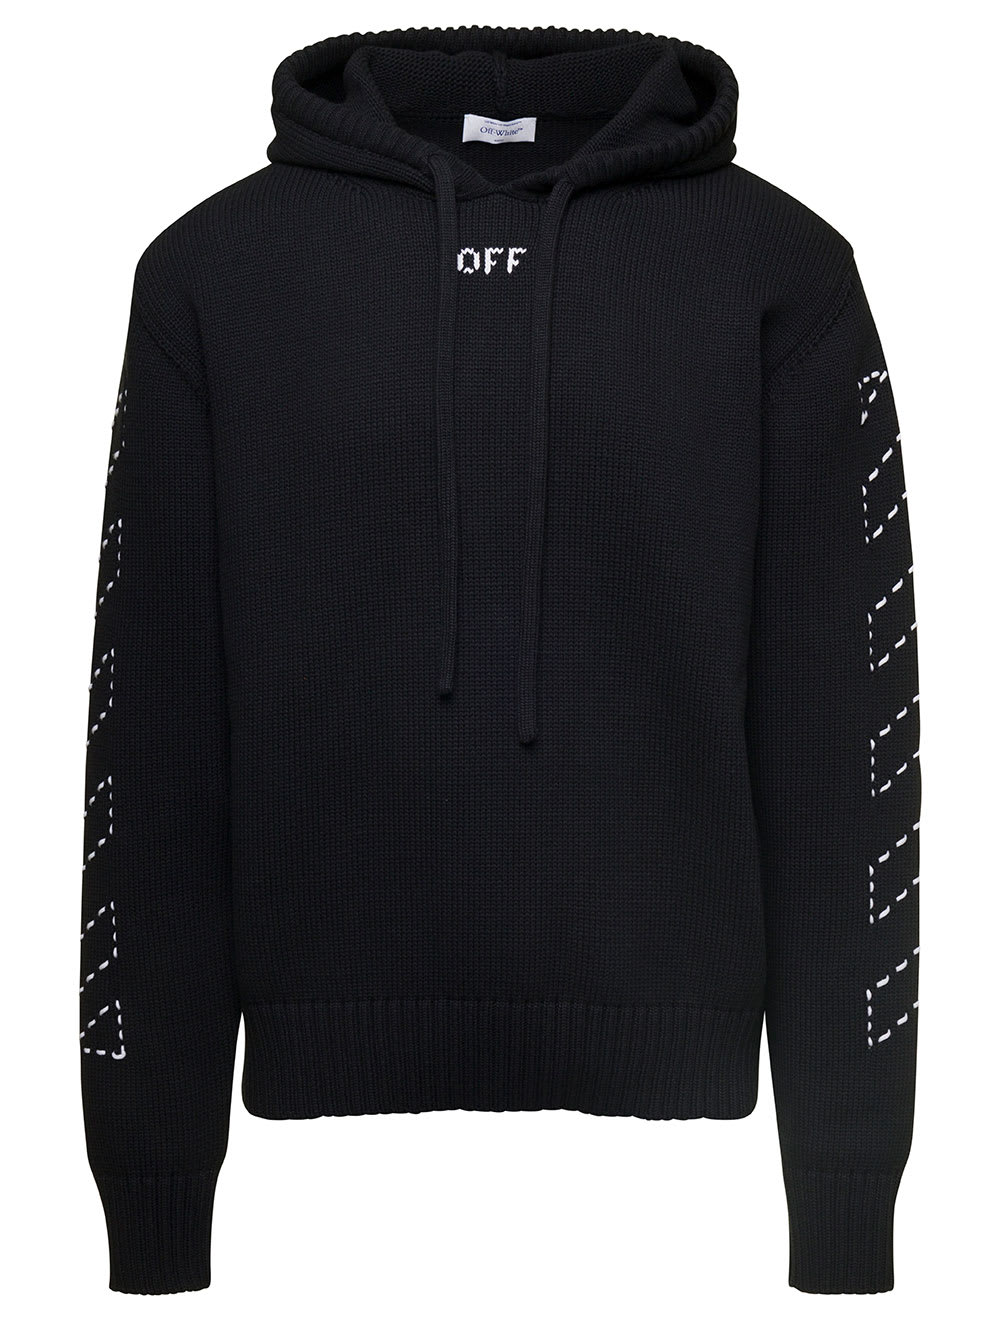 OFF-WHITE STITCH ARR DIAGS KNIT HOODIE BLACK WHITE